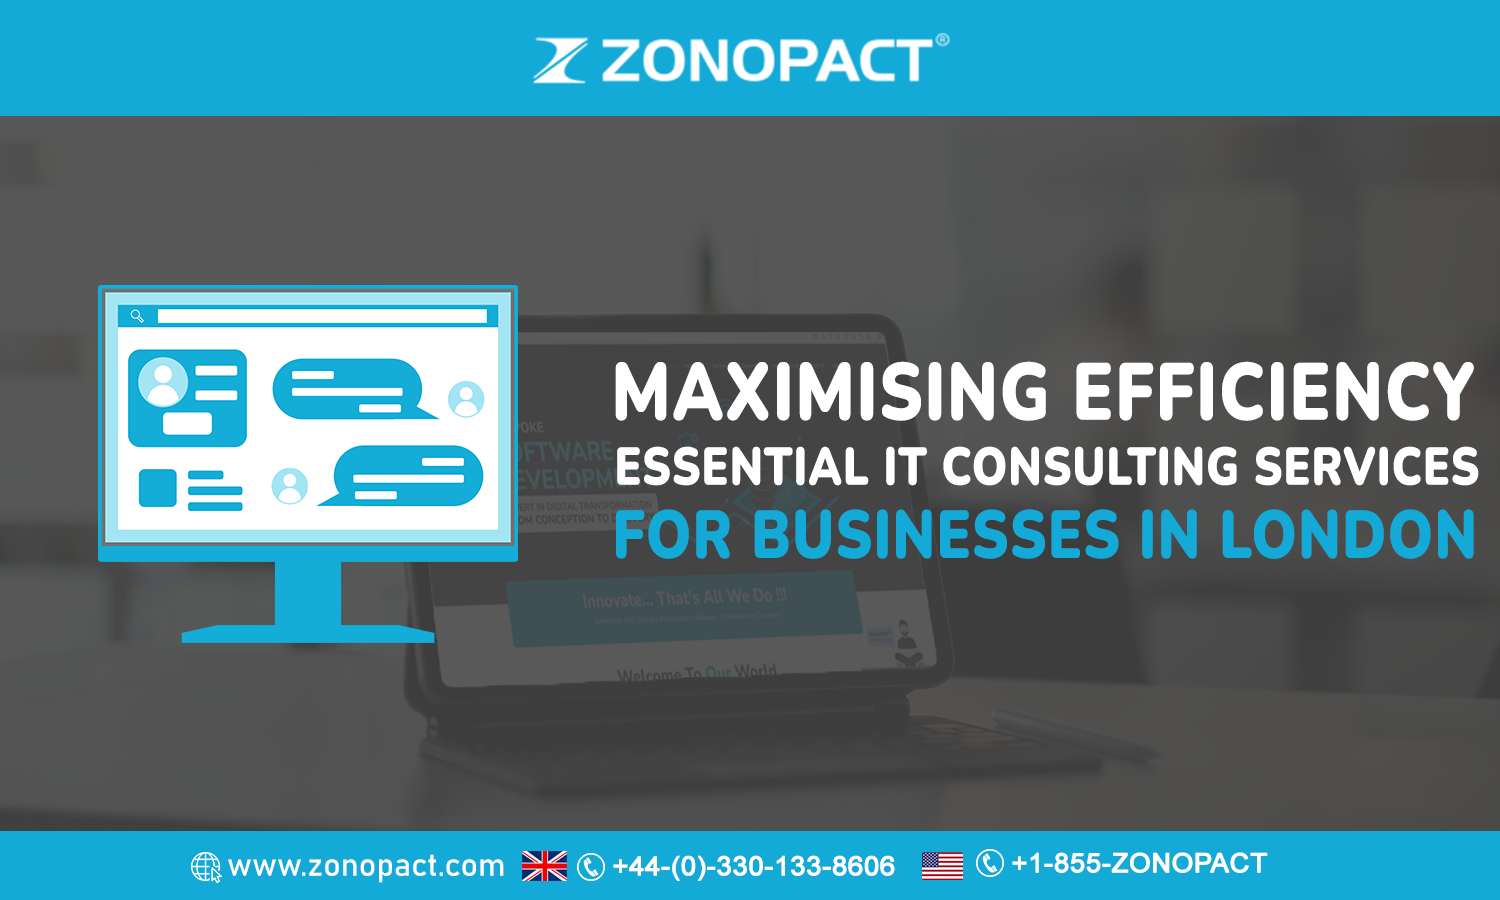 Maximising Efficiency Essential IT Consulting Services for Businesses in _London